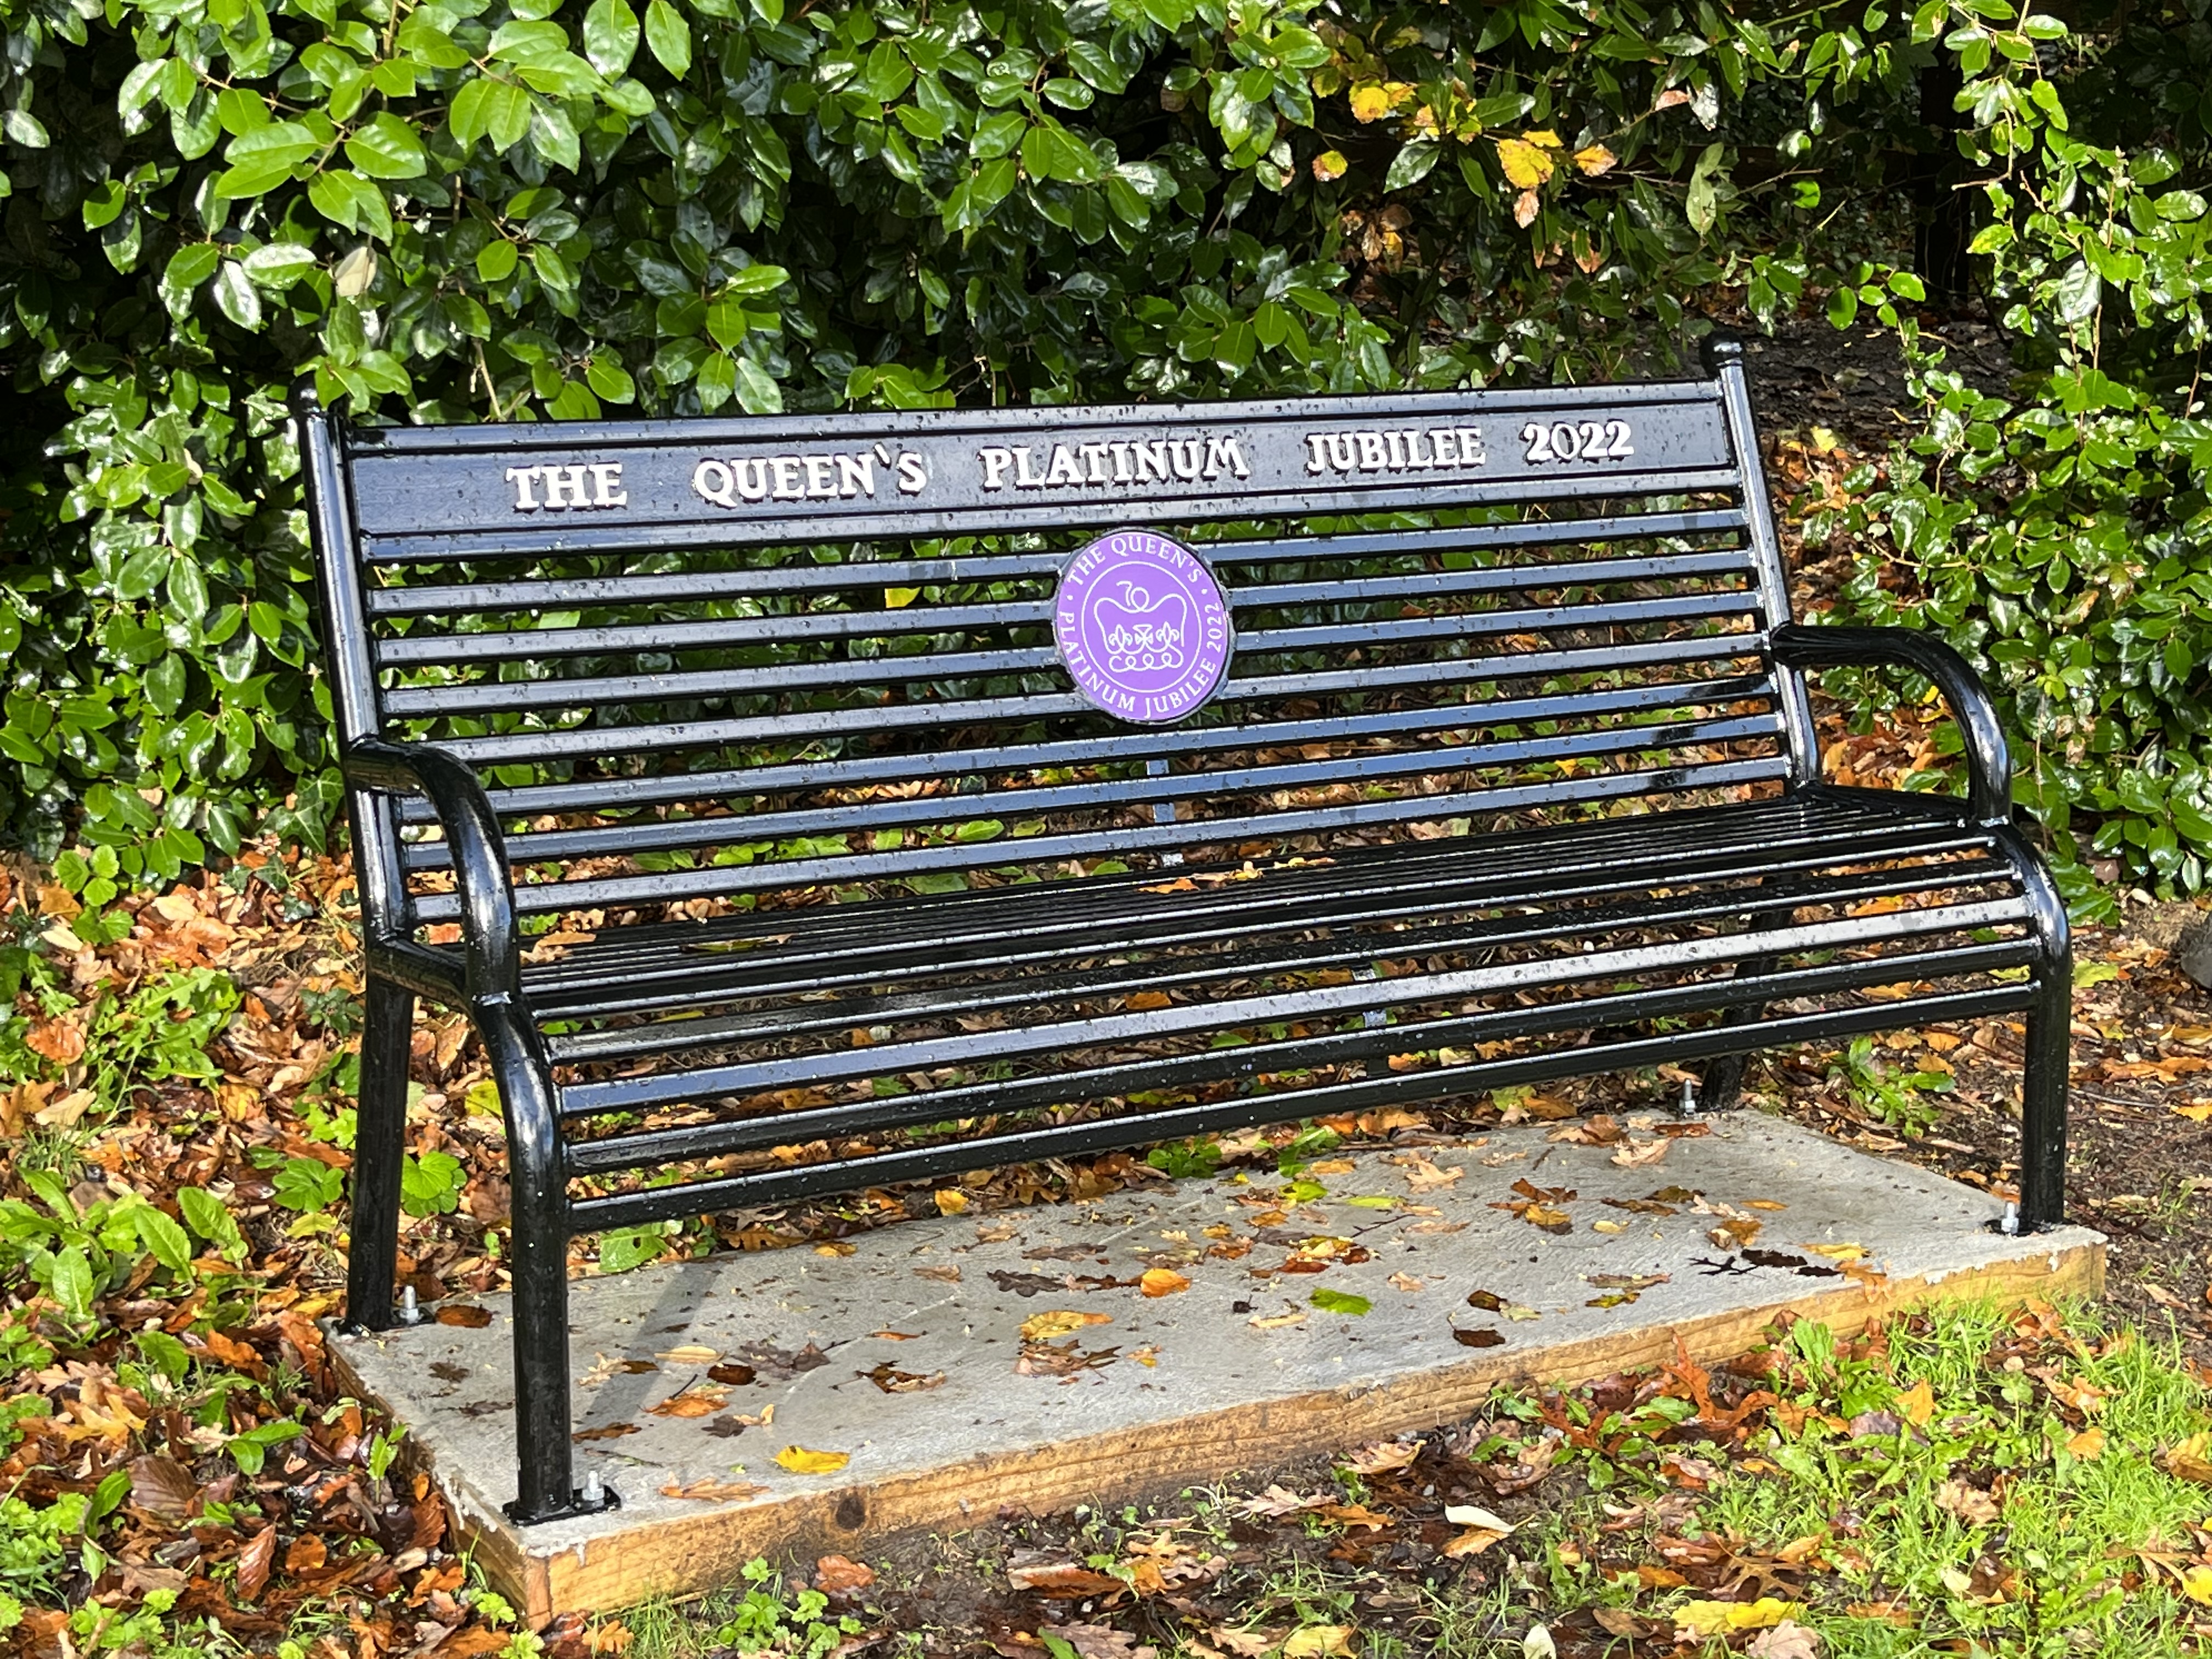 The final Jubilee Benches